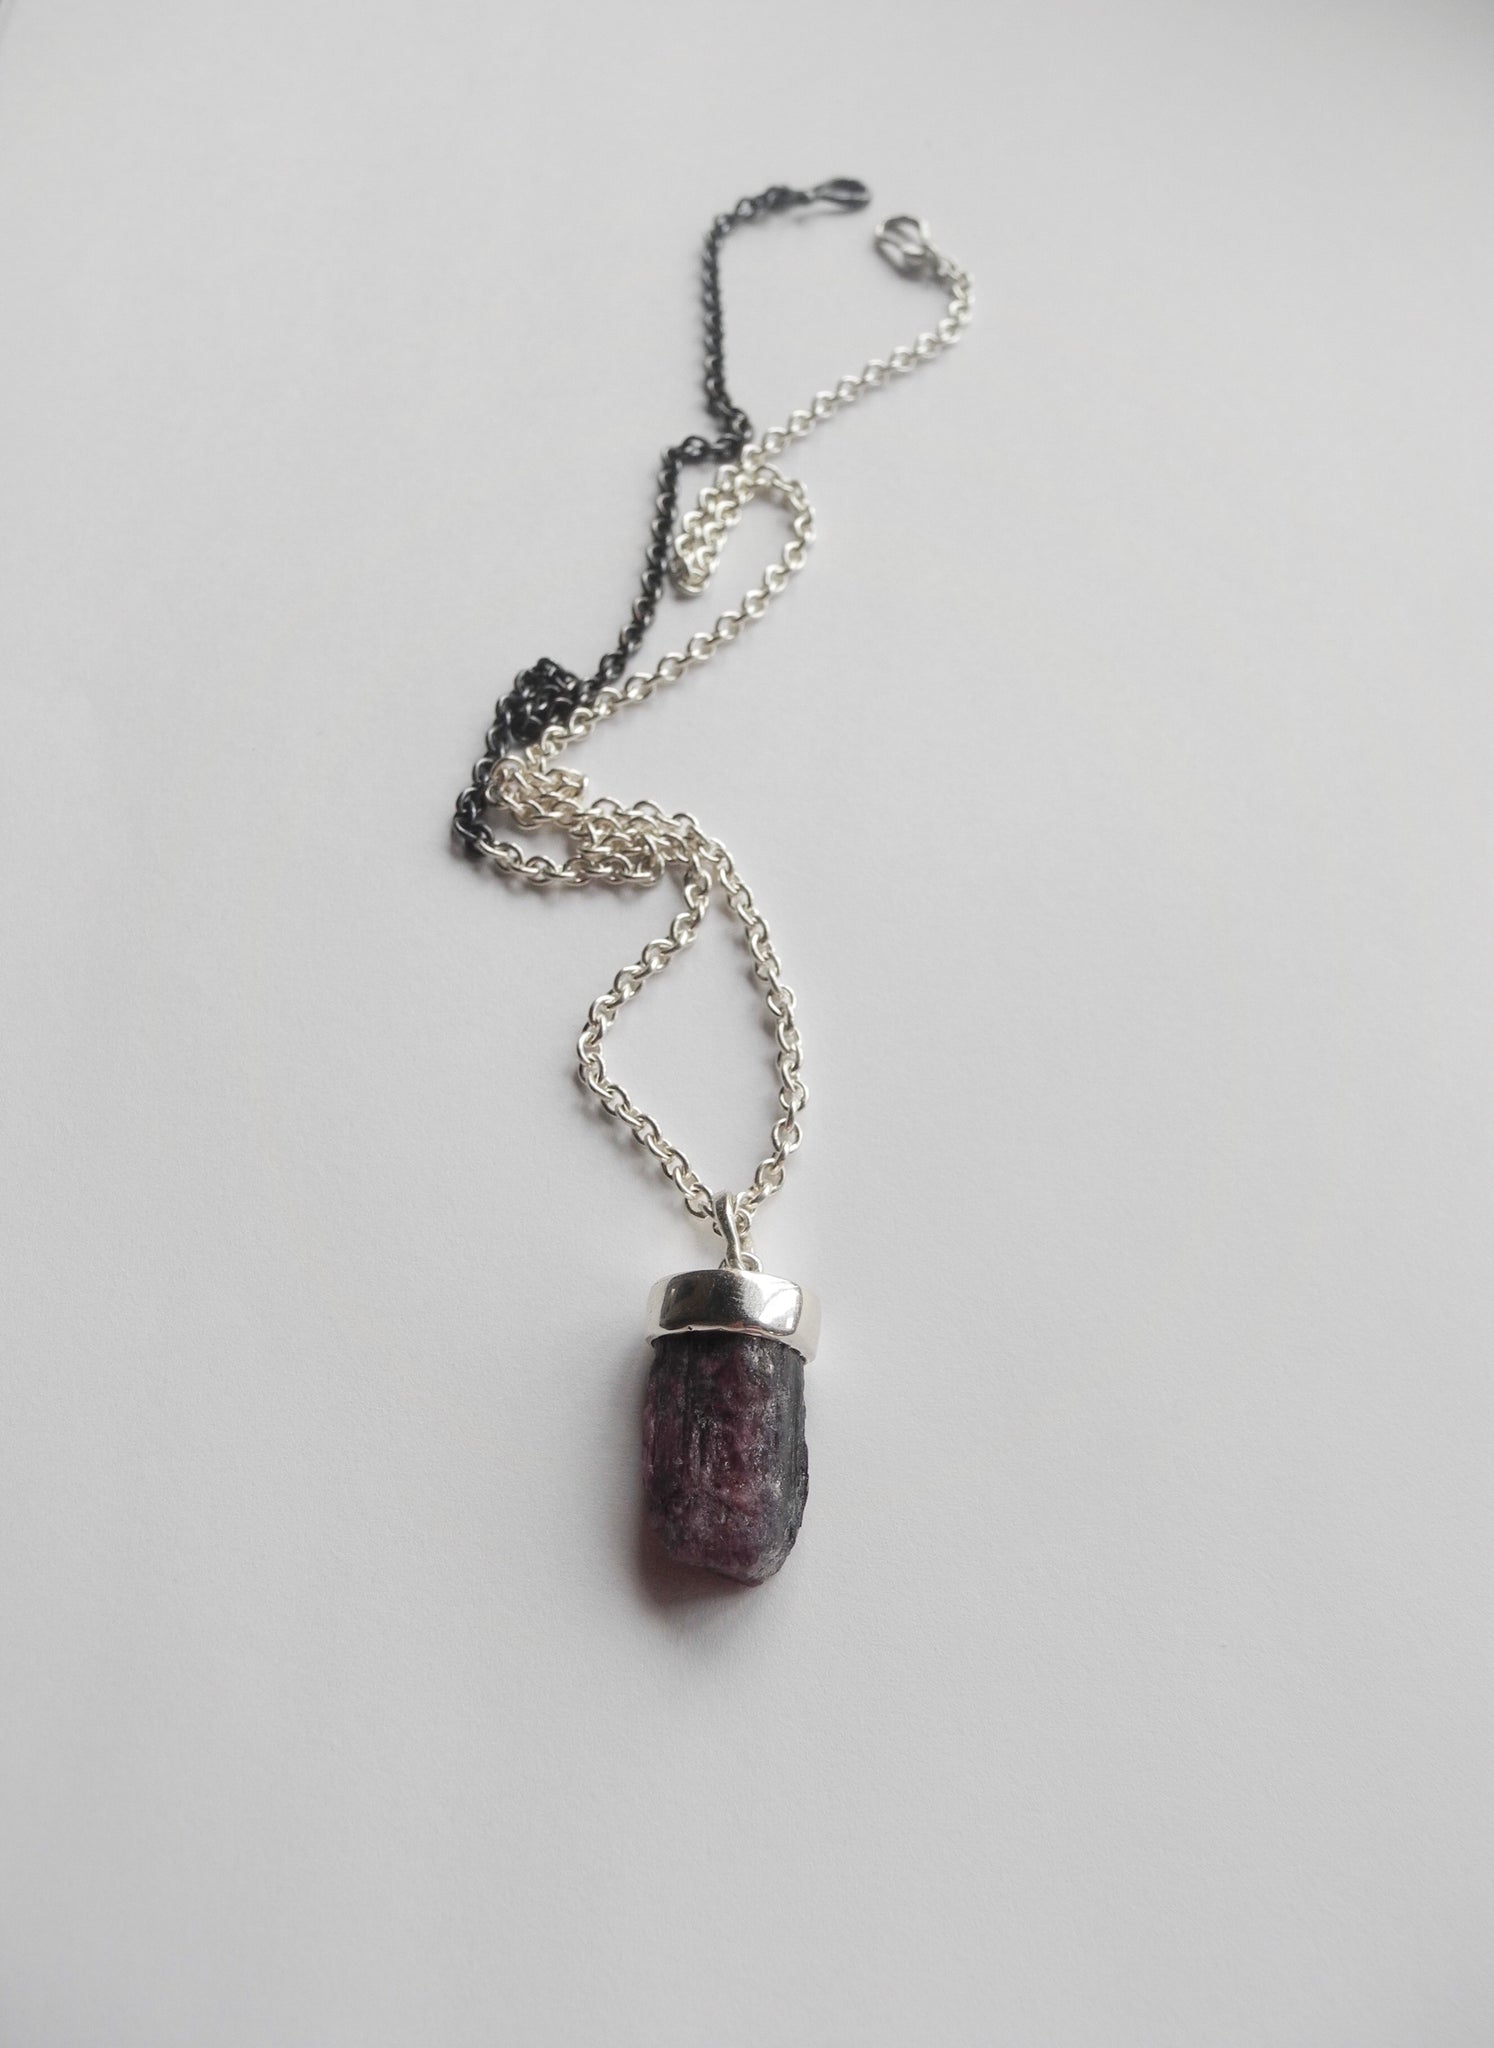 Turamali (something small from the earth) Necklace